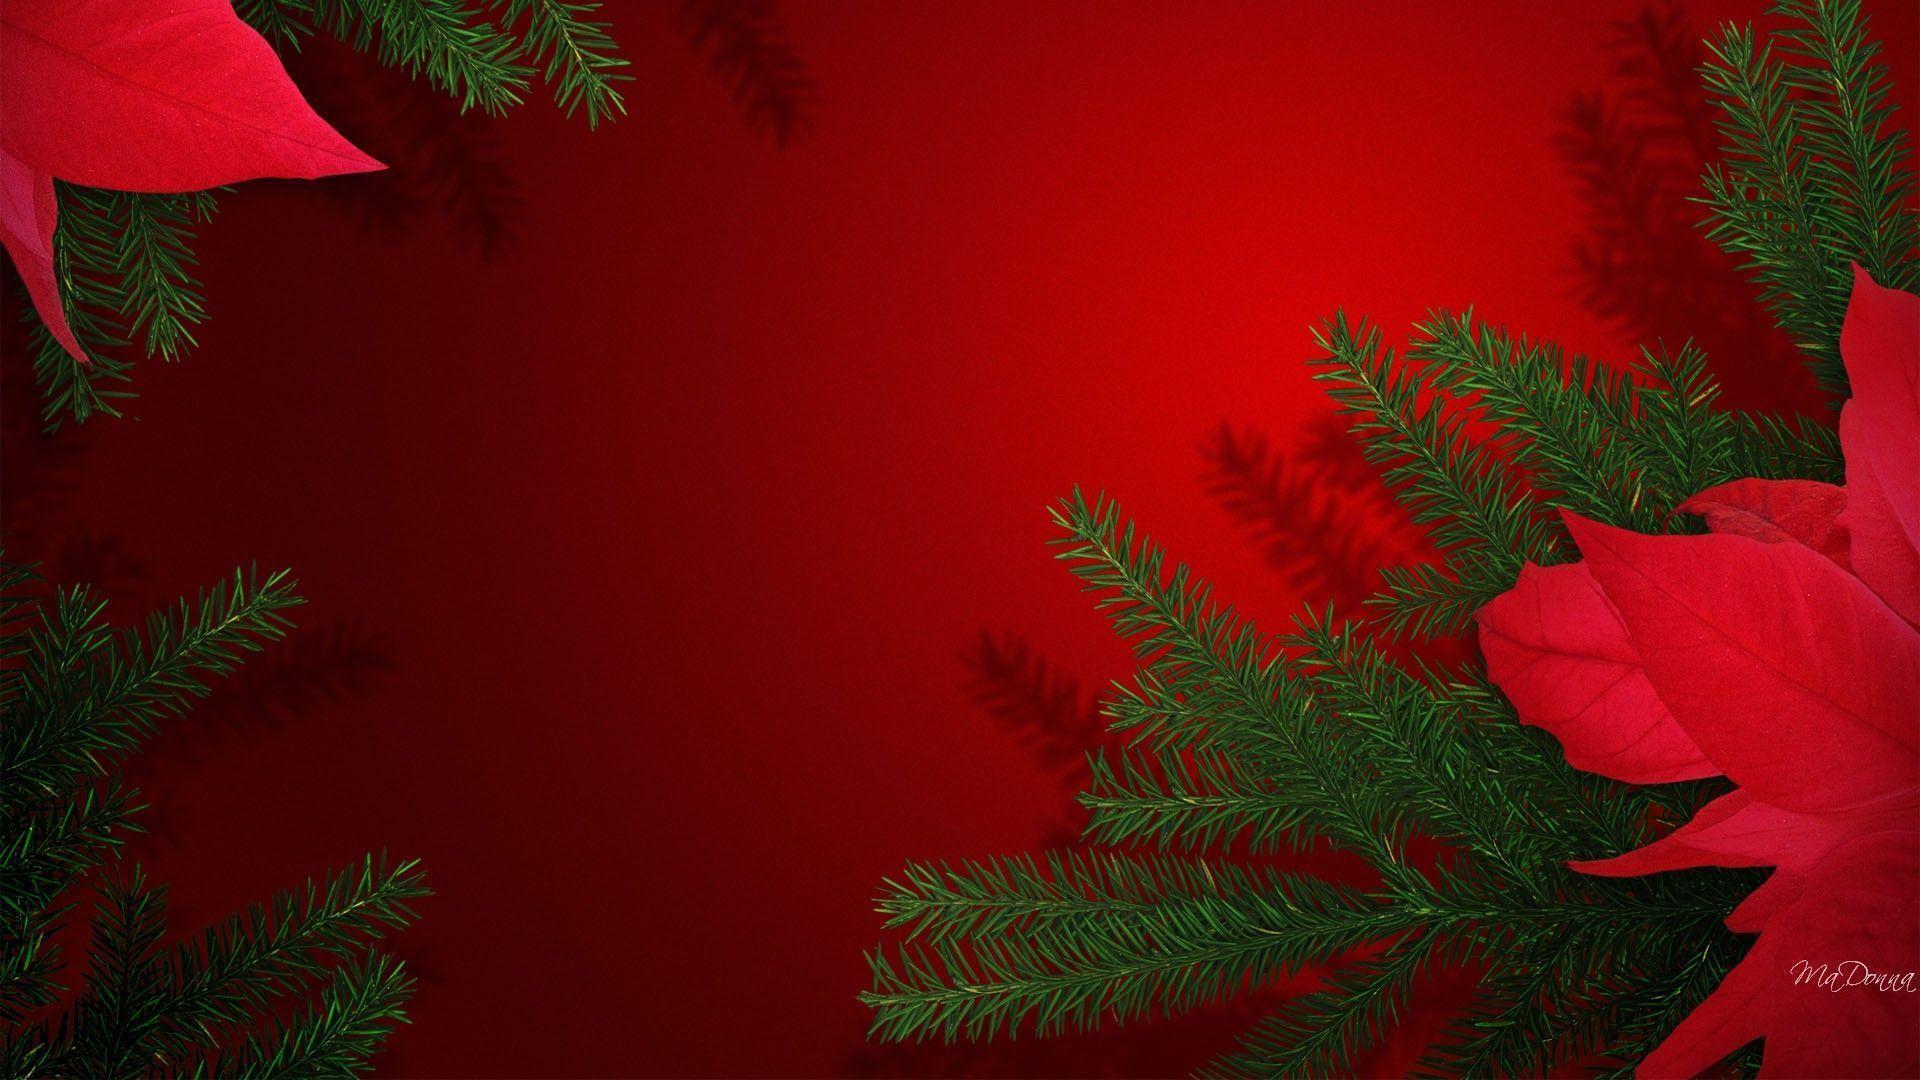 Abstract Christmas Backgrounds - Wallpaper Cave